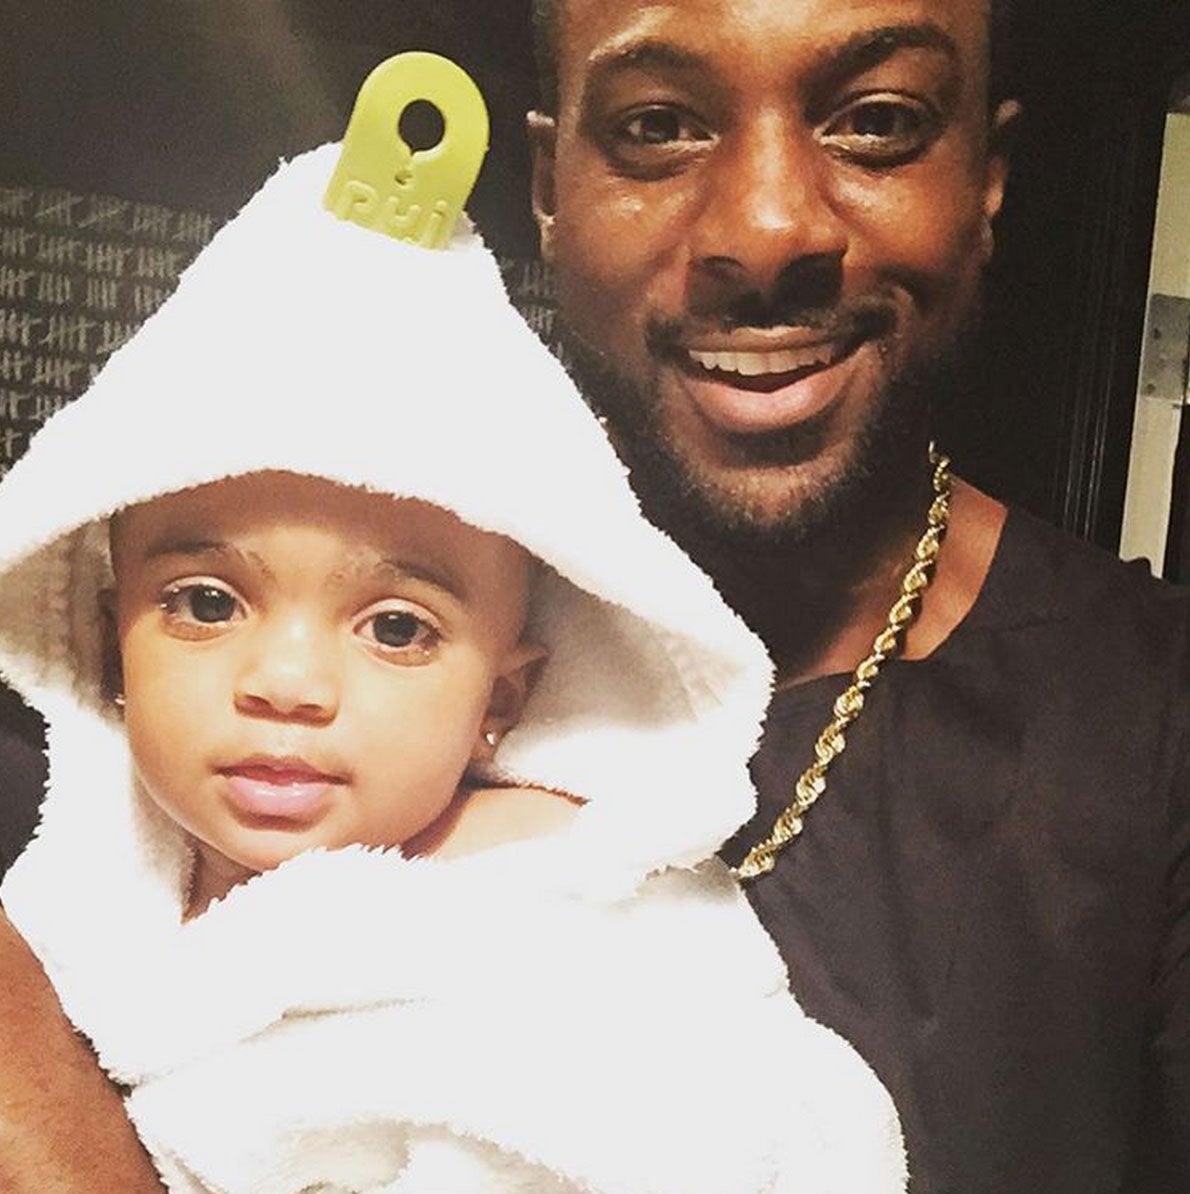 Proof that Lance Gross and His Daughter Are the Cutest Duo Ever
